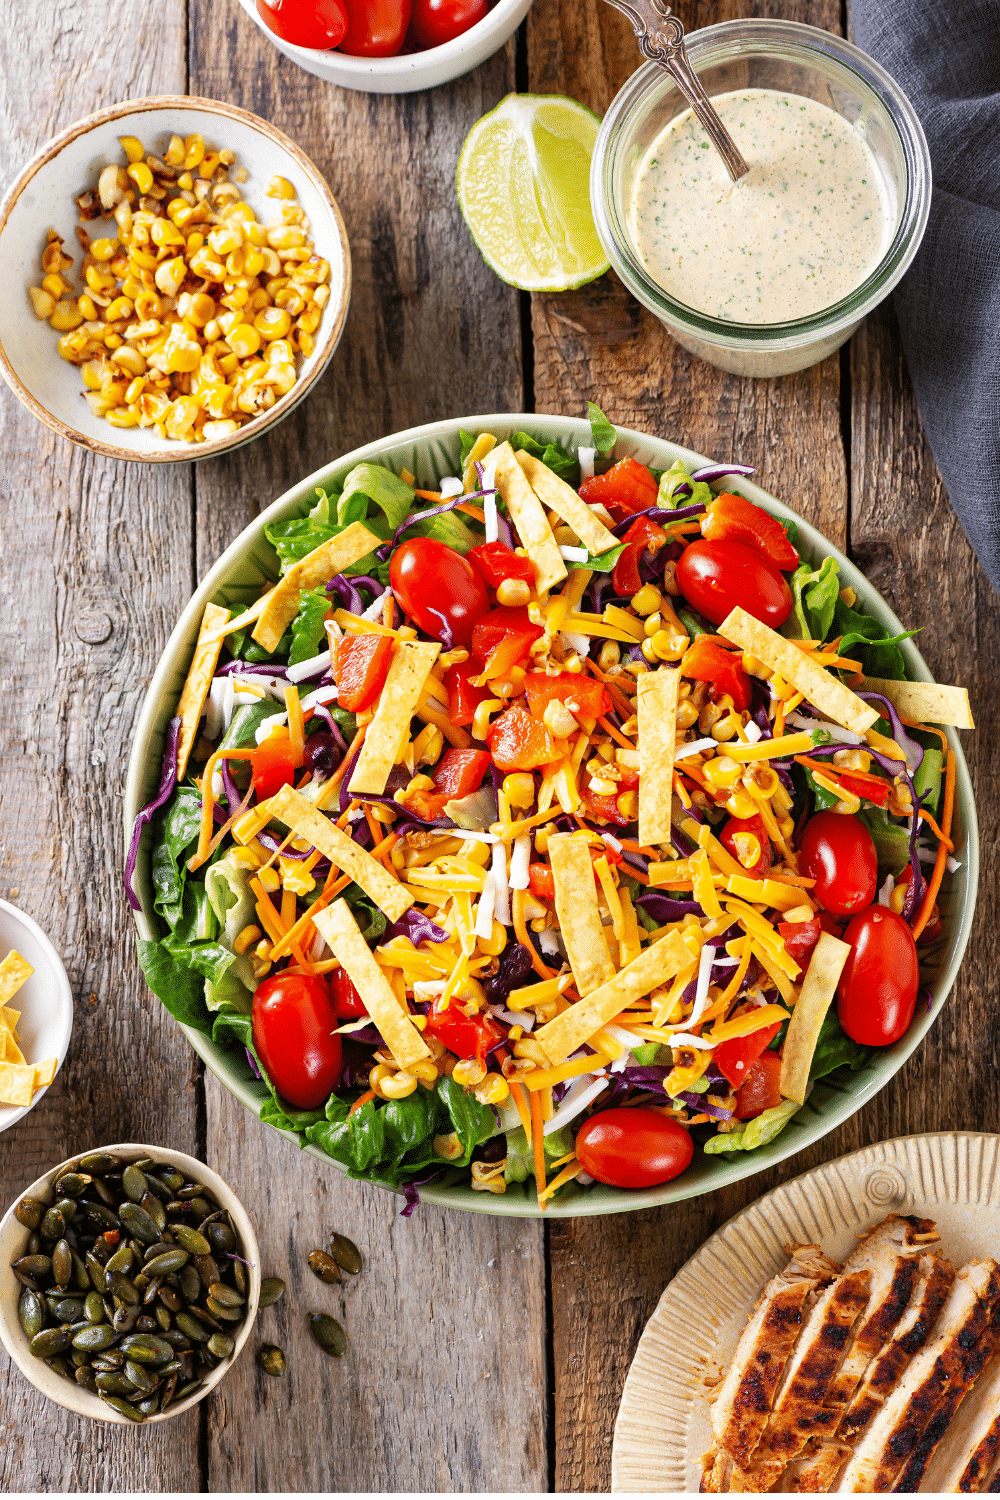 Is southwest salad in a white bowl. There is a small white cup of chili lime pepitas in front of it, a small white bowl of corn behind it, and a small glass jar of creamy salsa dressing behind it.